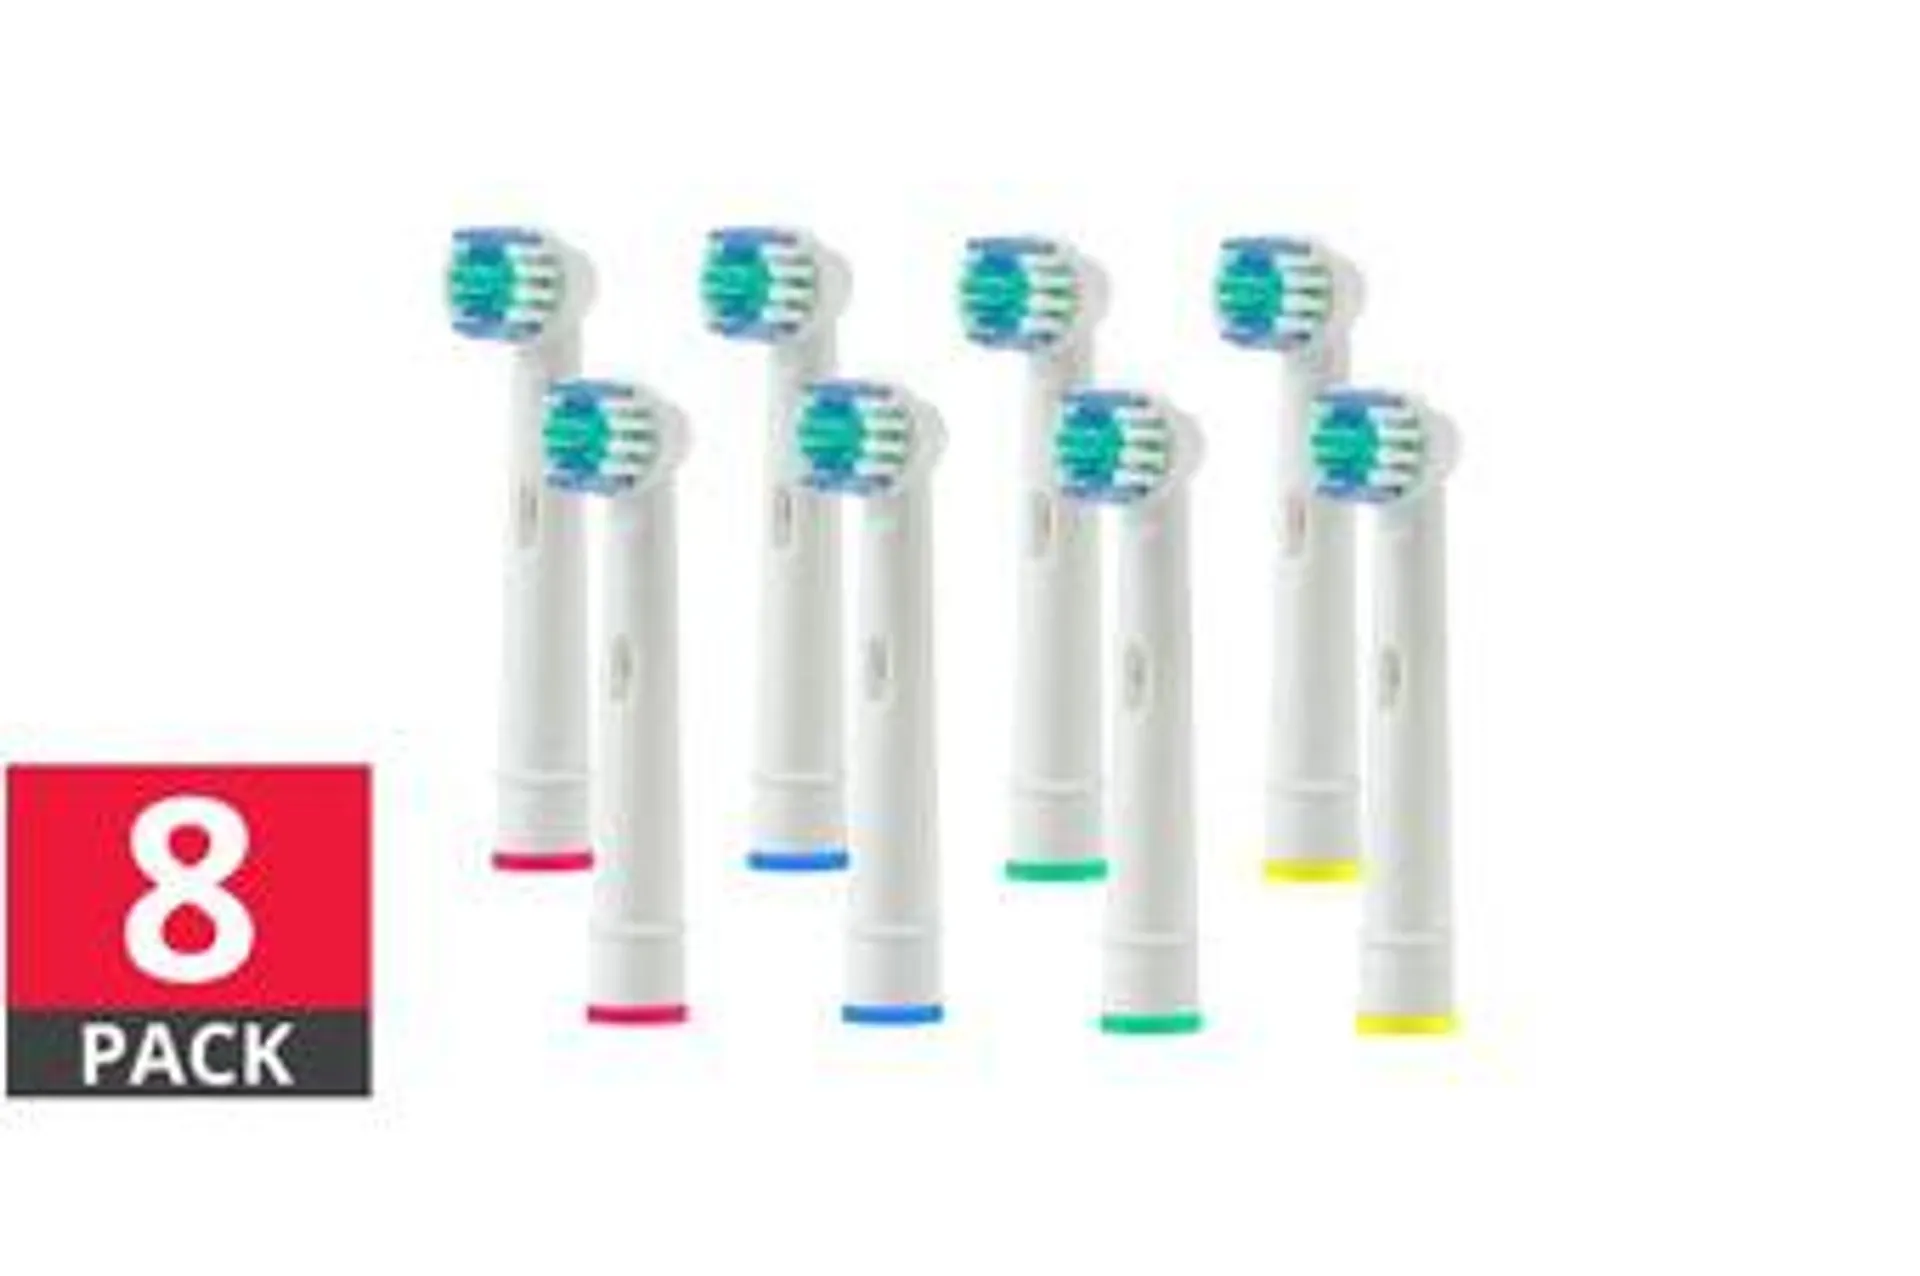 8 Pack Replacement Toothbrush Heads - Oral-B Compatible